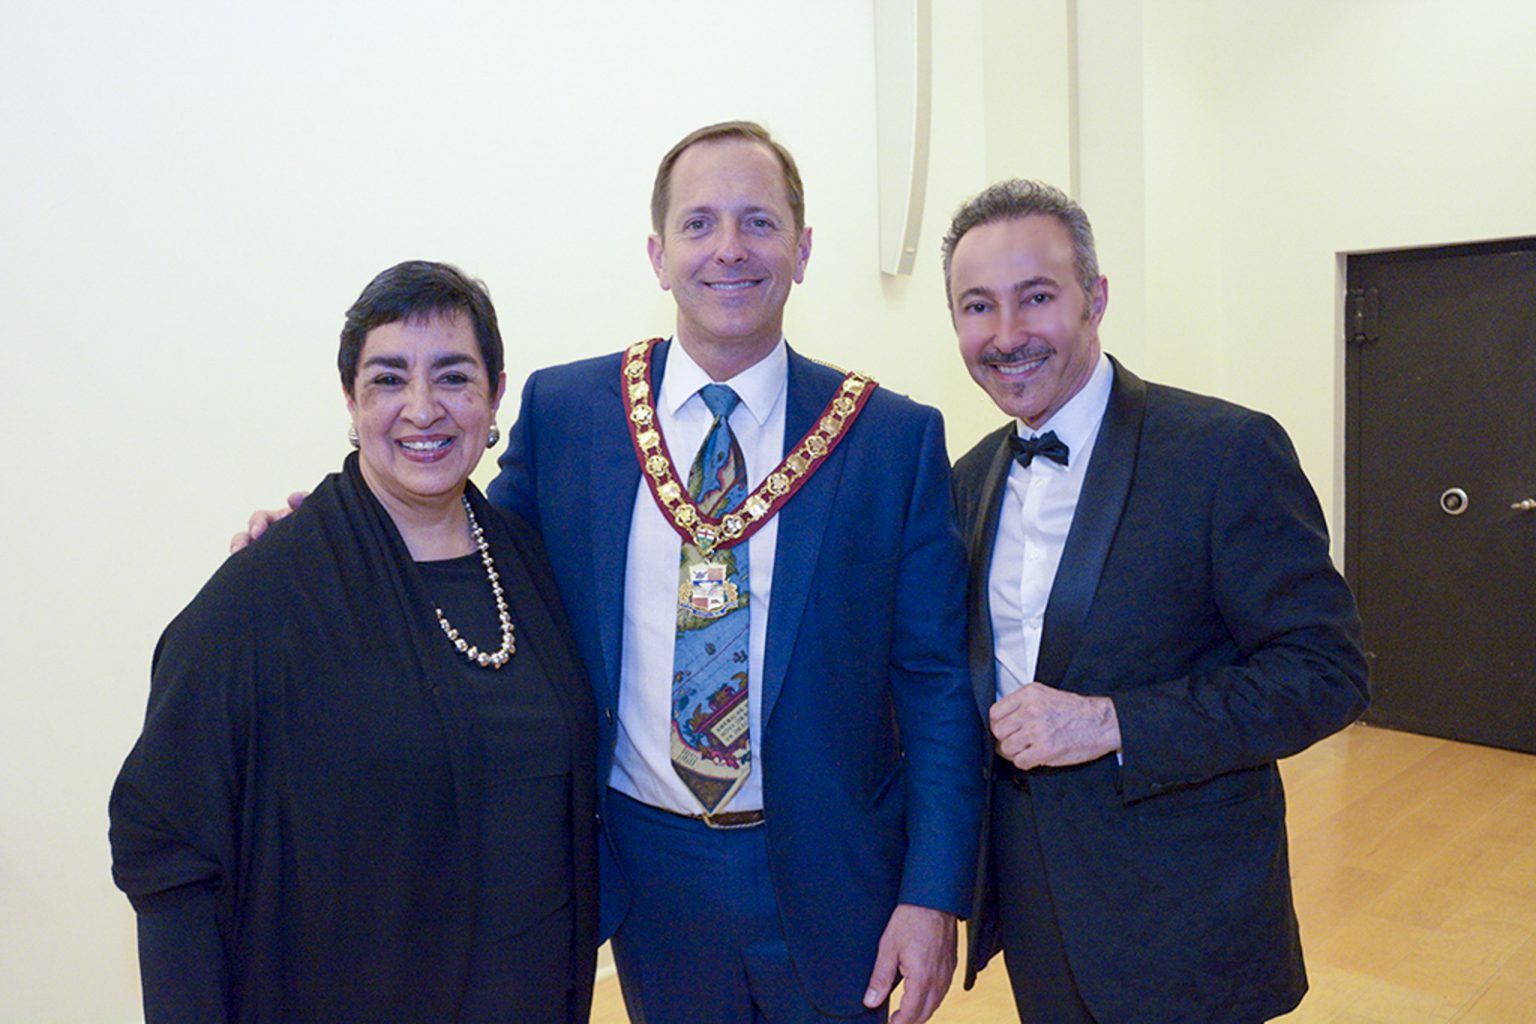 Angelina Herrera International Cultural Promoter / Event Coordinator, Event Curator / Art Director, Antoine Gaber , and the Patron of the Water for Life, International Art Exhibition, First Edition, the Mayor of Niagara Falls, Jim Diodati.